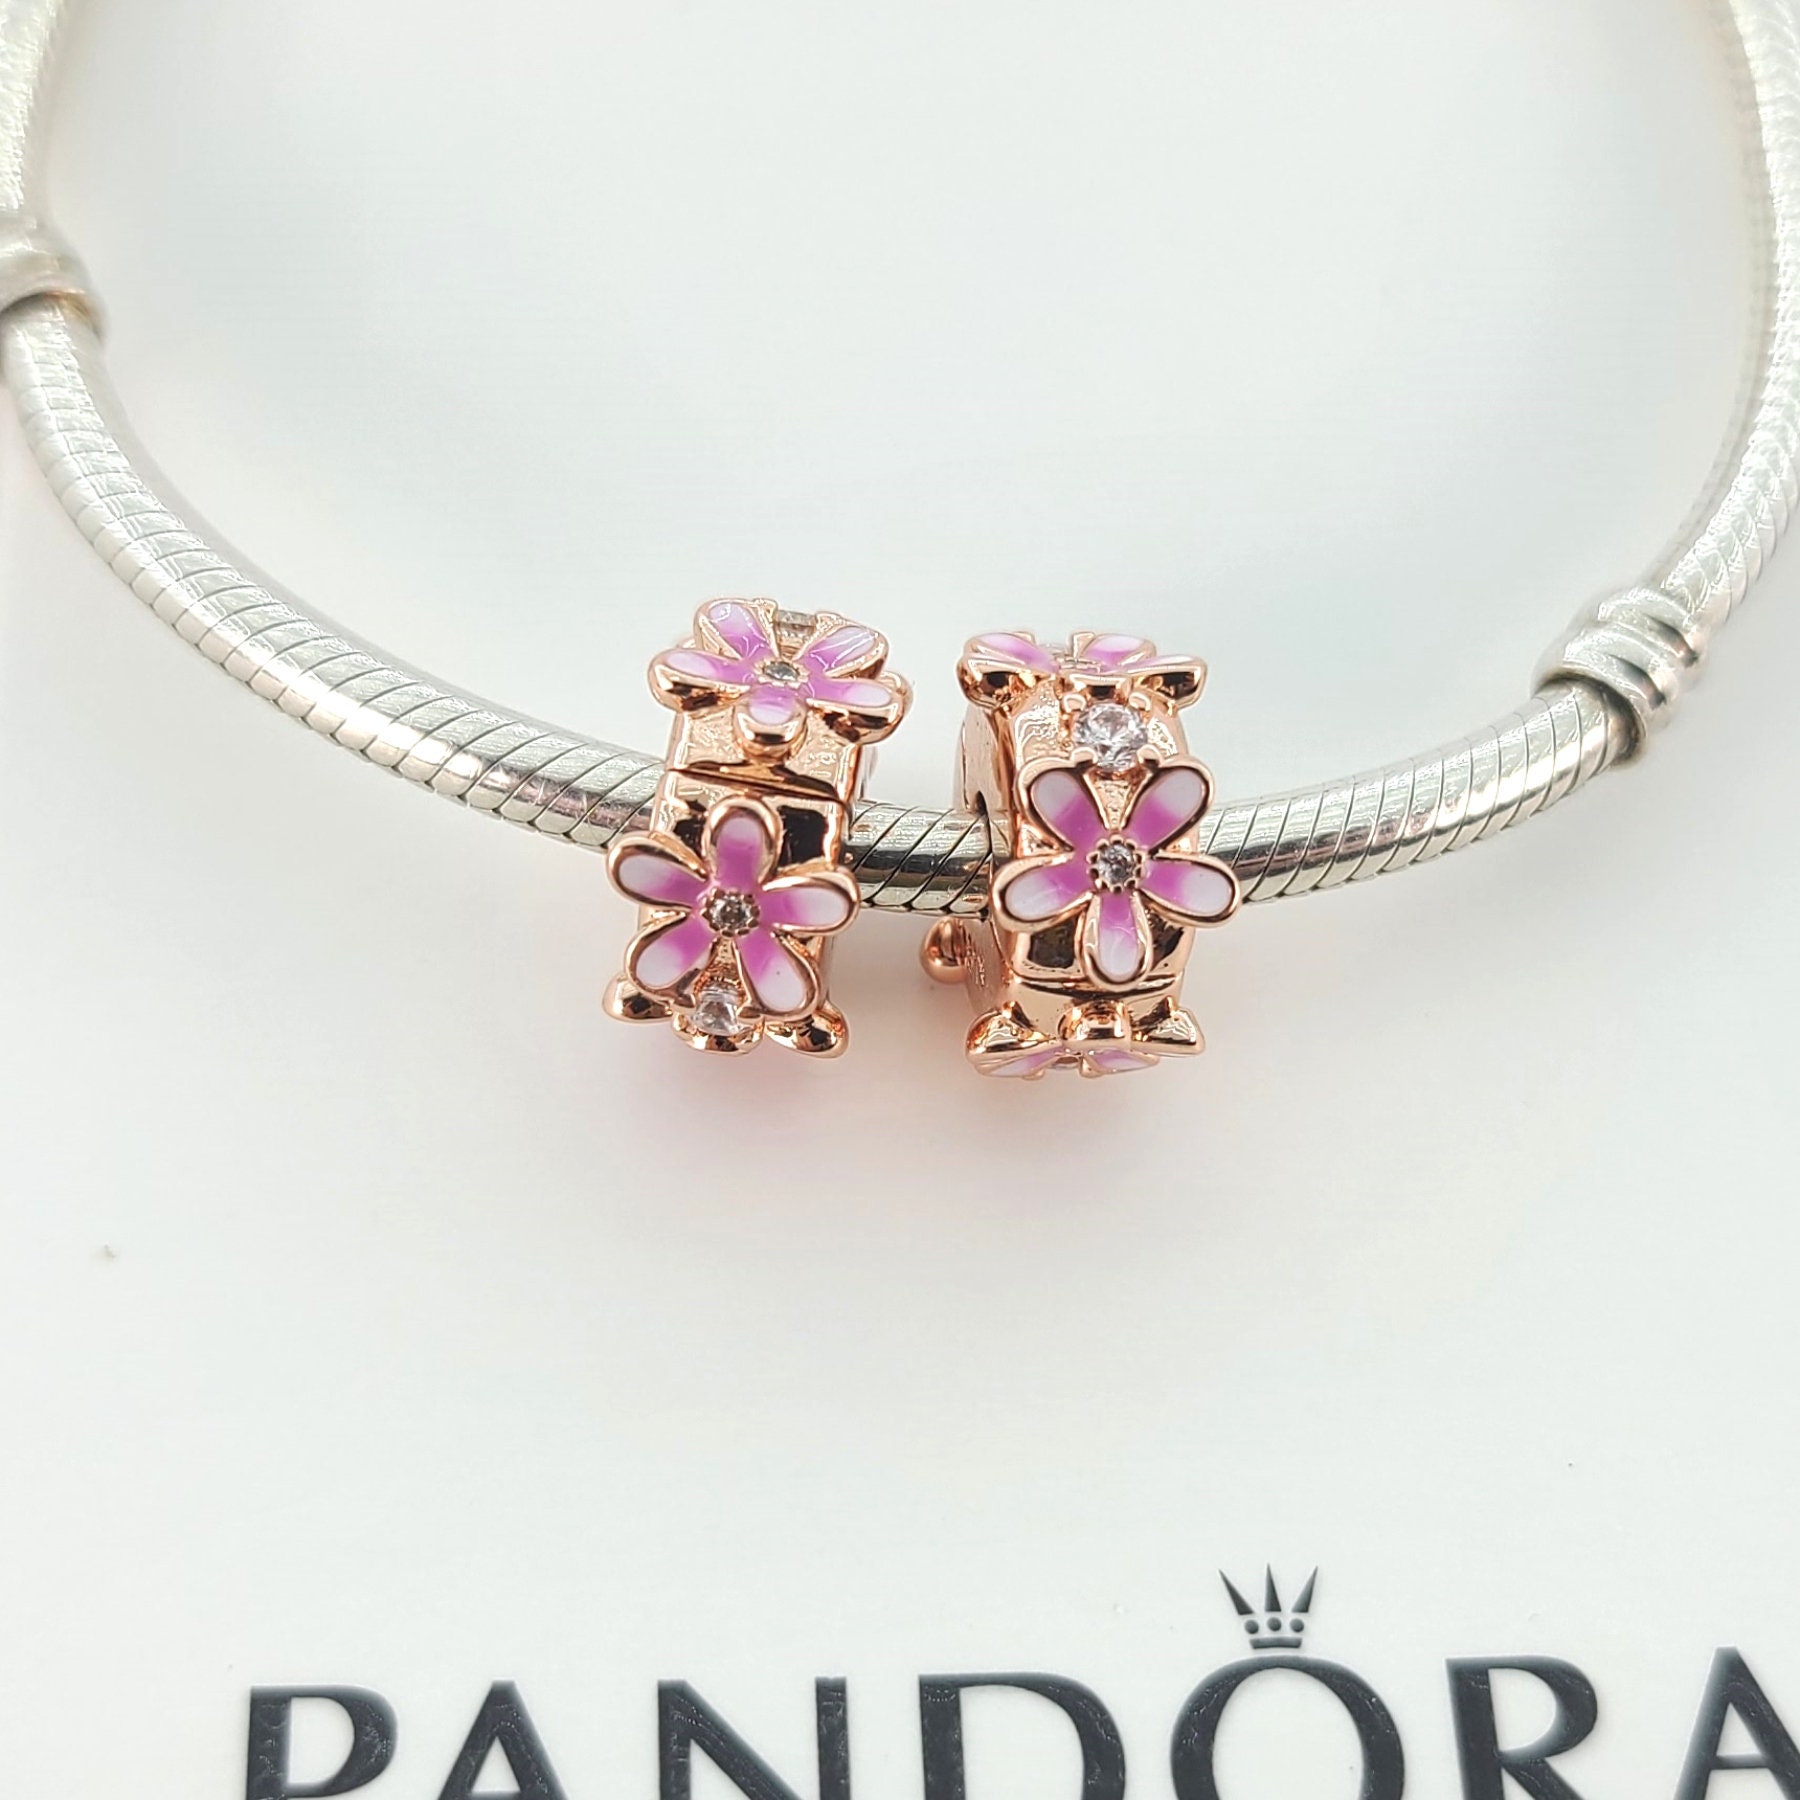 Pandora Pink Sparkle Spacer Charm 791359pcz – Busy Bee Jewelry